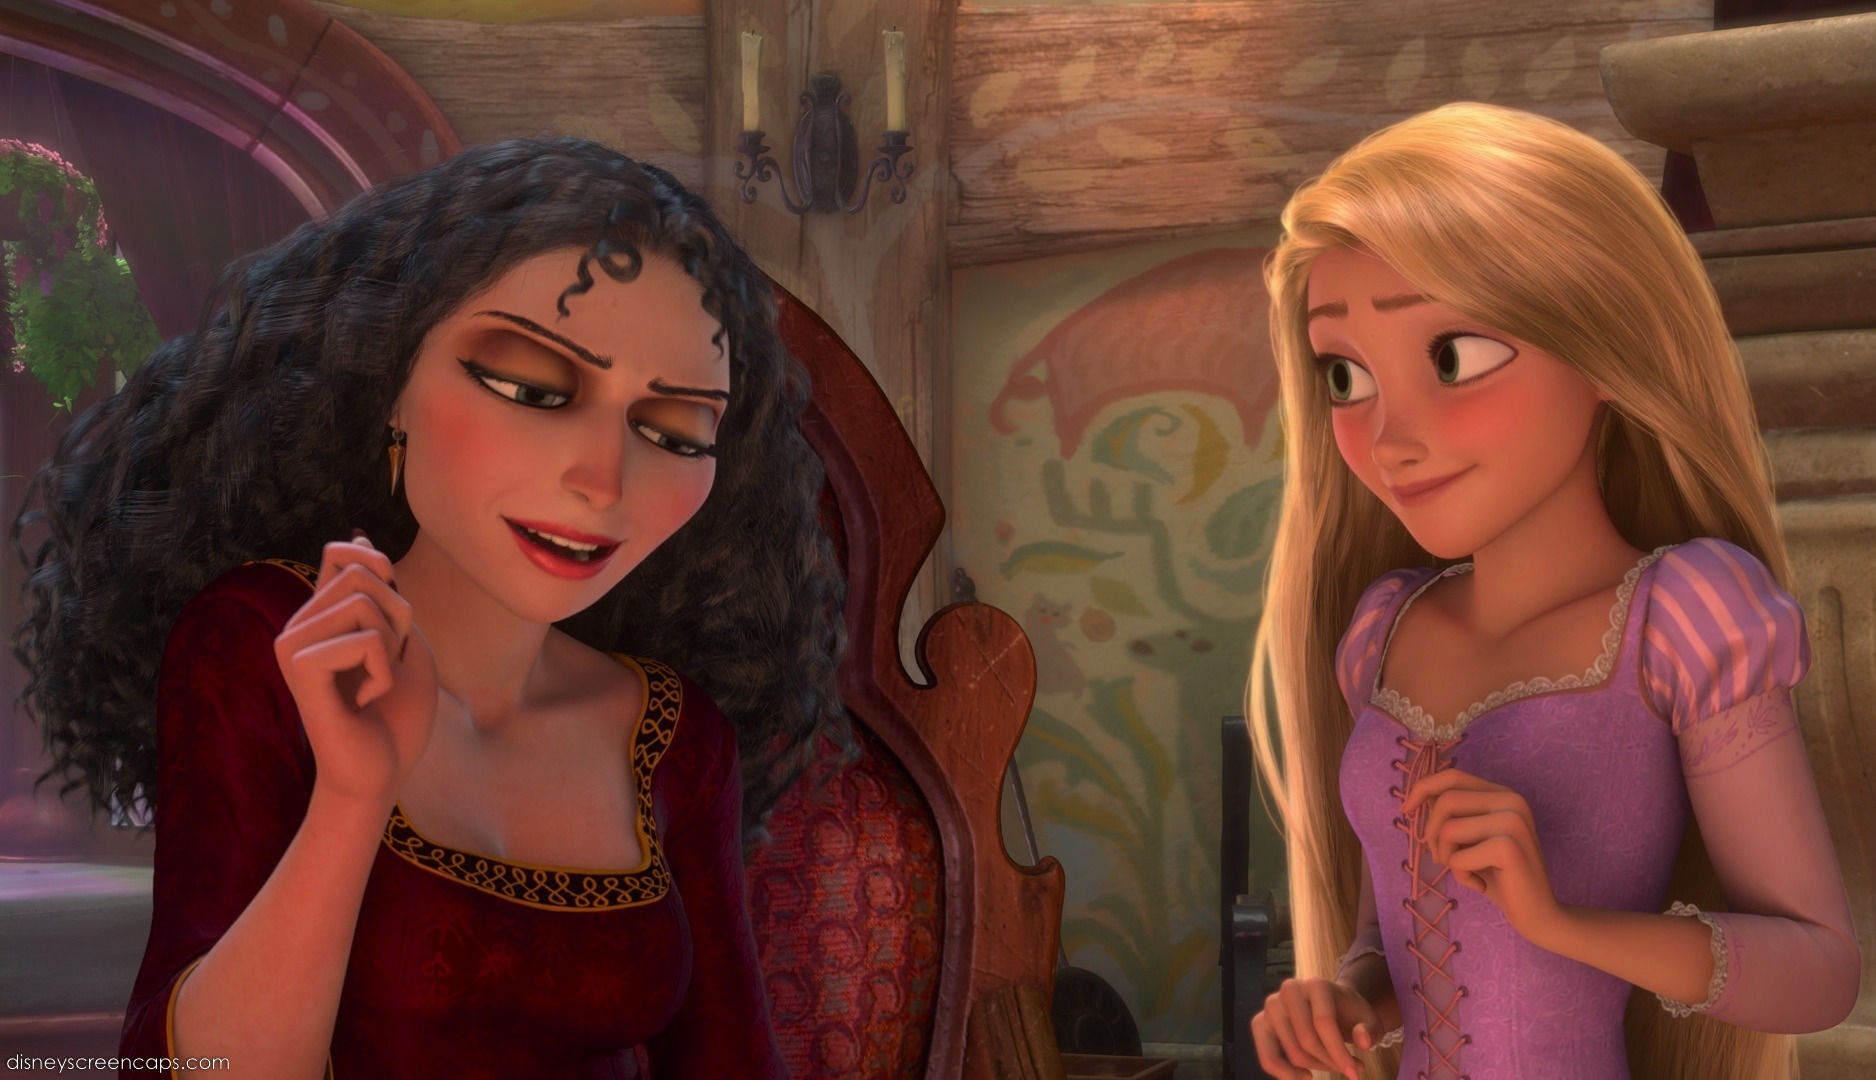 Pretty Rapunzel And Mother Gothel Disney Females Image 21561044